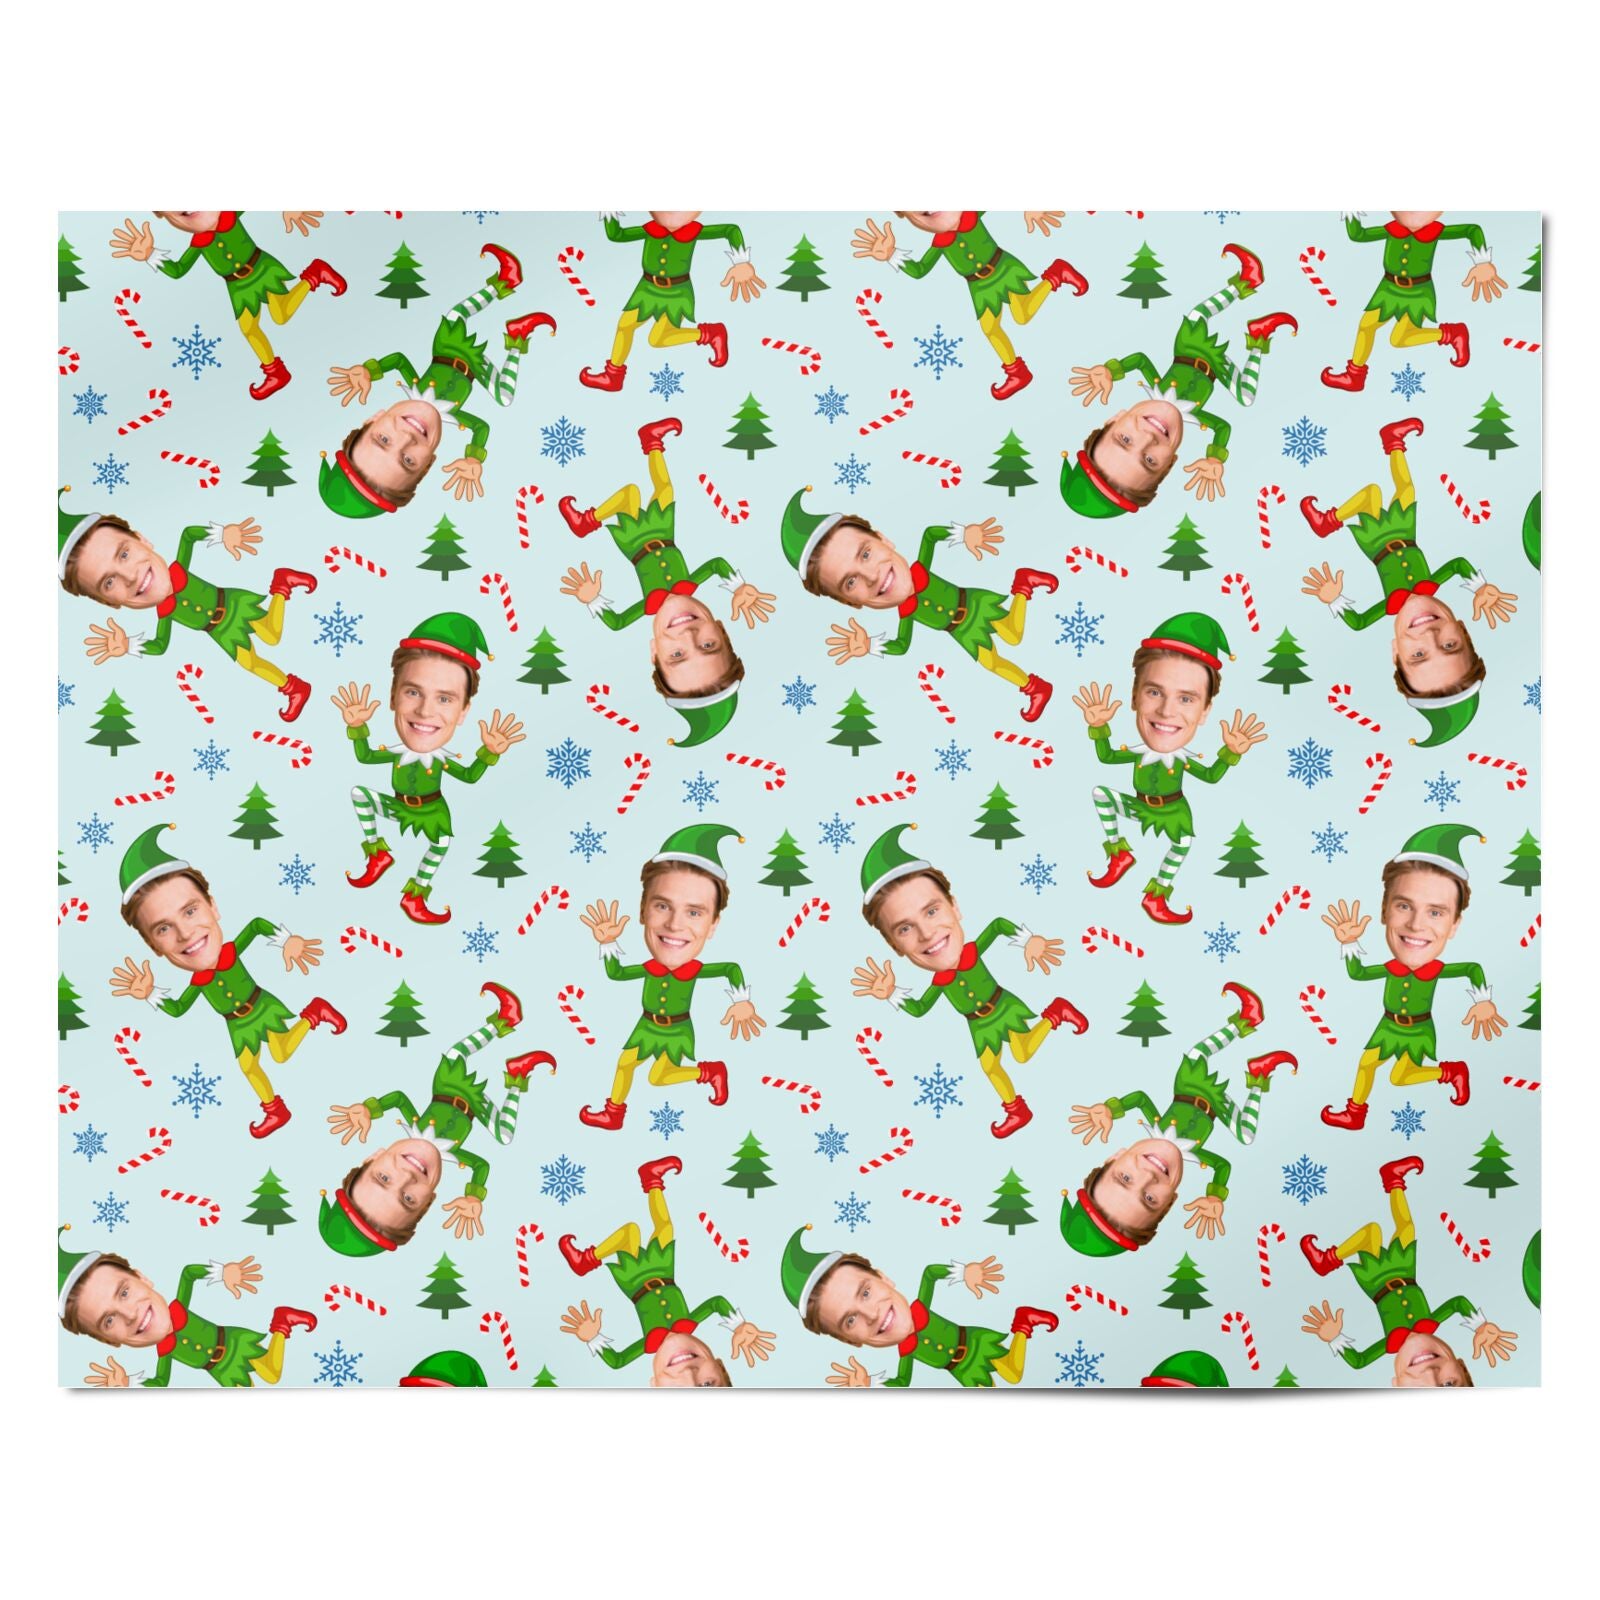 The Elf on the Shelf® Personalized Wrapping Paper, Fancy Wrapping Paper,  for Her, for Him, Christmas Wrapping Paper, Christmas, Giftwrap 